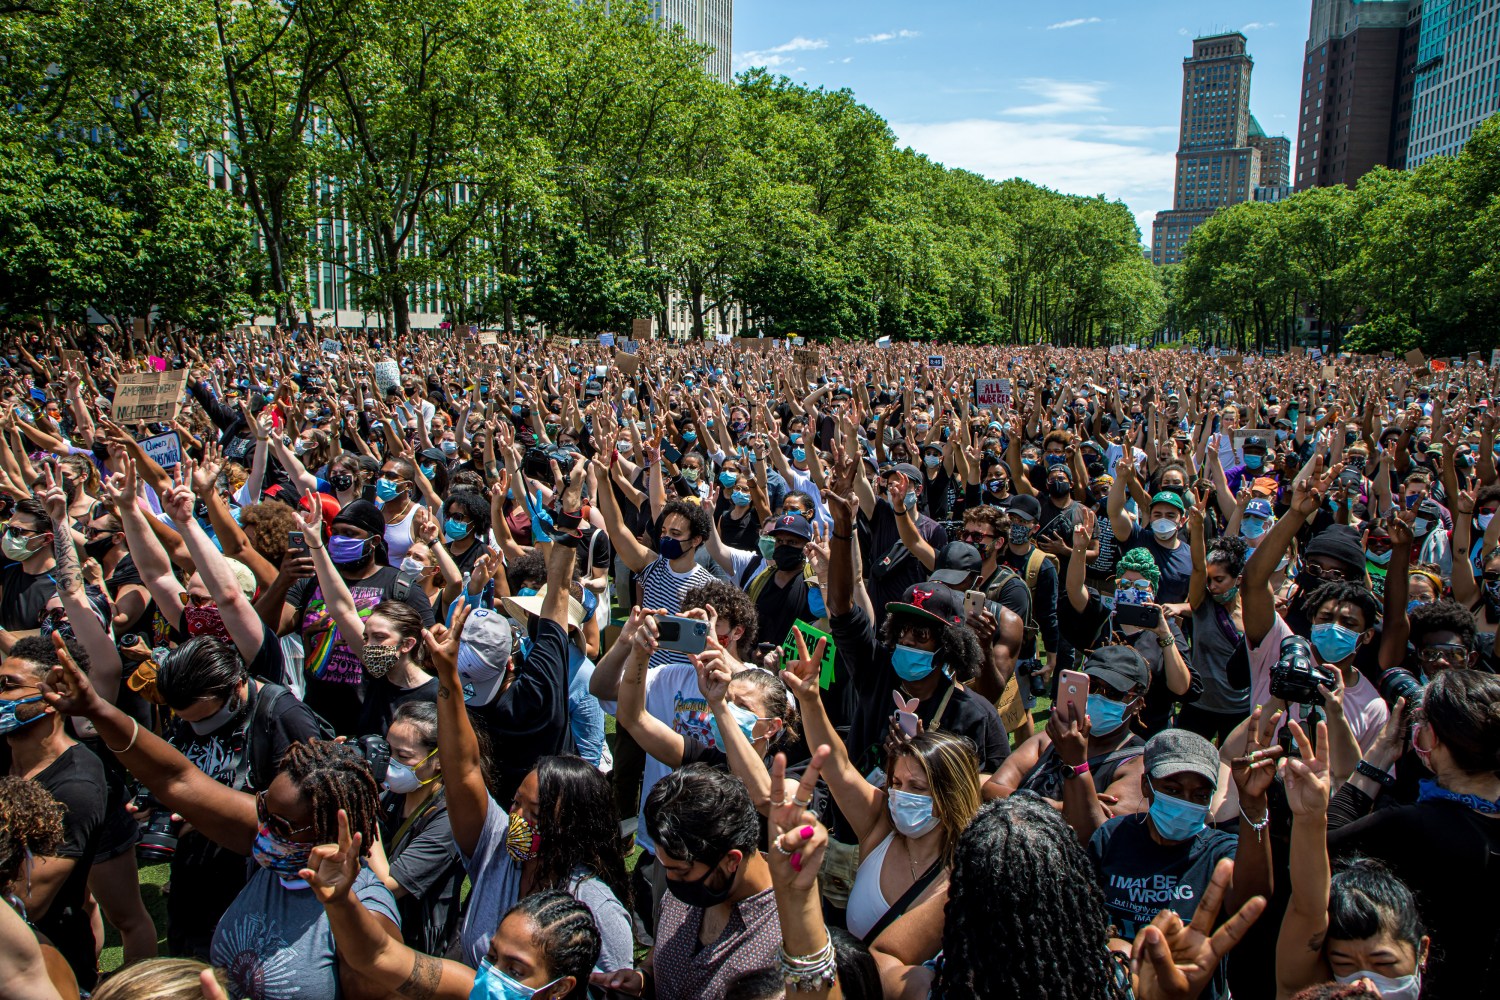 People participate in a peaceful memorial for George Floyd at Cadman Plaza Park in Brooklyn, New York, NY on June 4, 2020. Protests are taking place across the country after the death of George Floyd, while in police custody in Minneapolis, was filmed by a bystander. (Photo by Christopher Lazzaro/Alive Coverage/Sipa USA)No Use UK. No Use Germany.